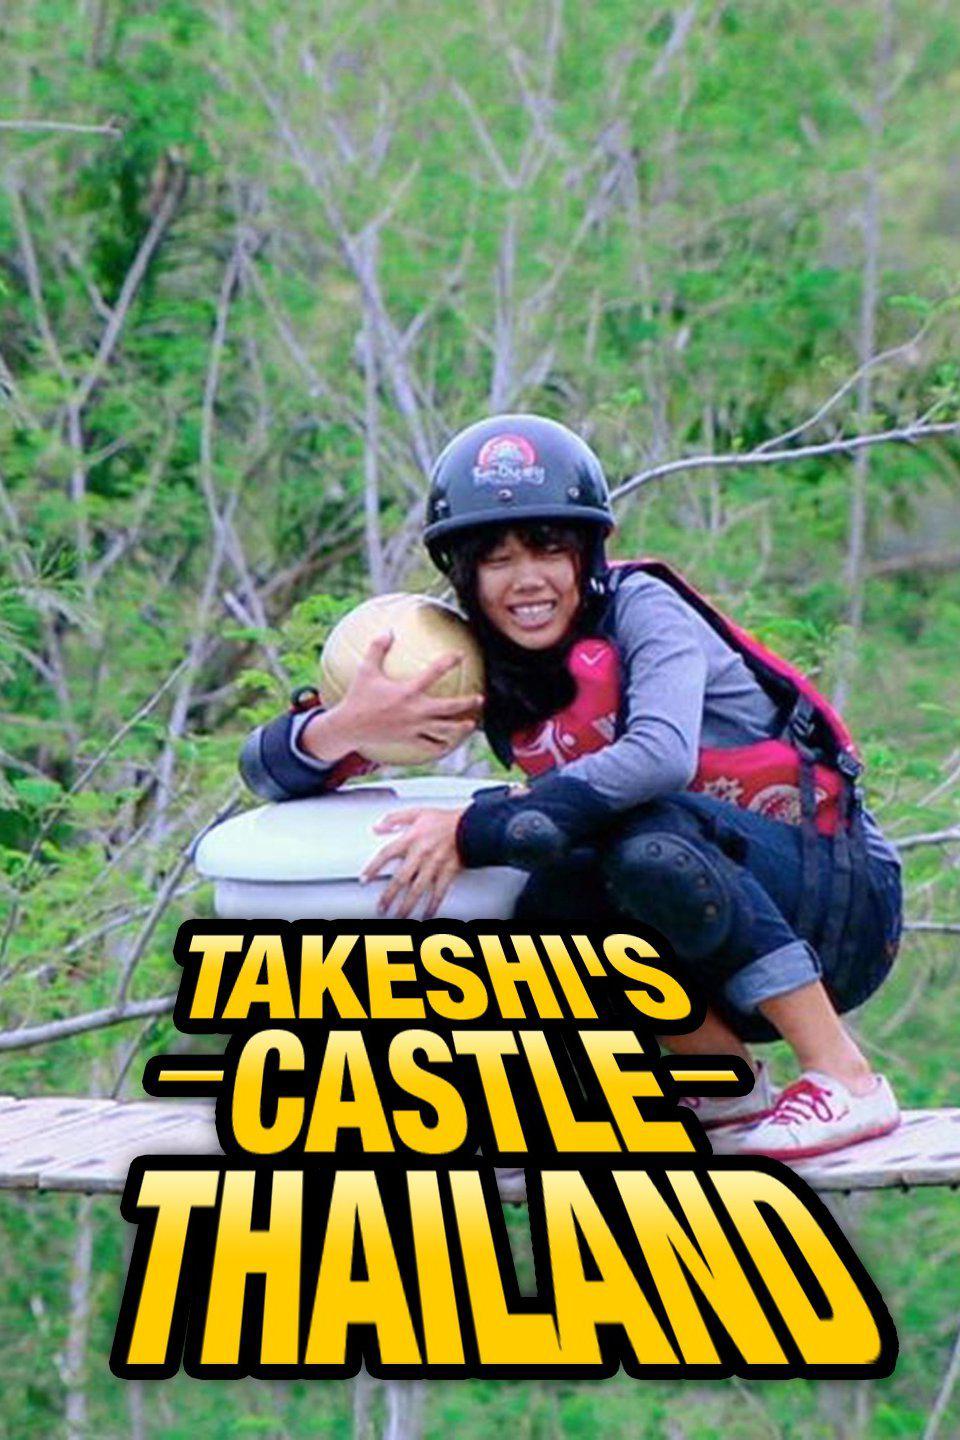 TV ratings for Takeshi's Castle Thailand in Polonia. Challenge TV TV series